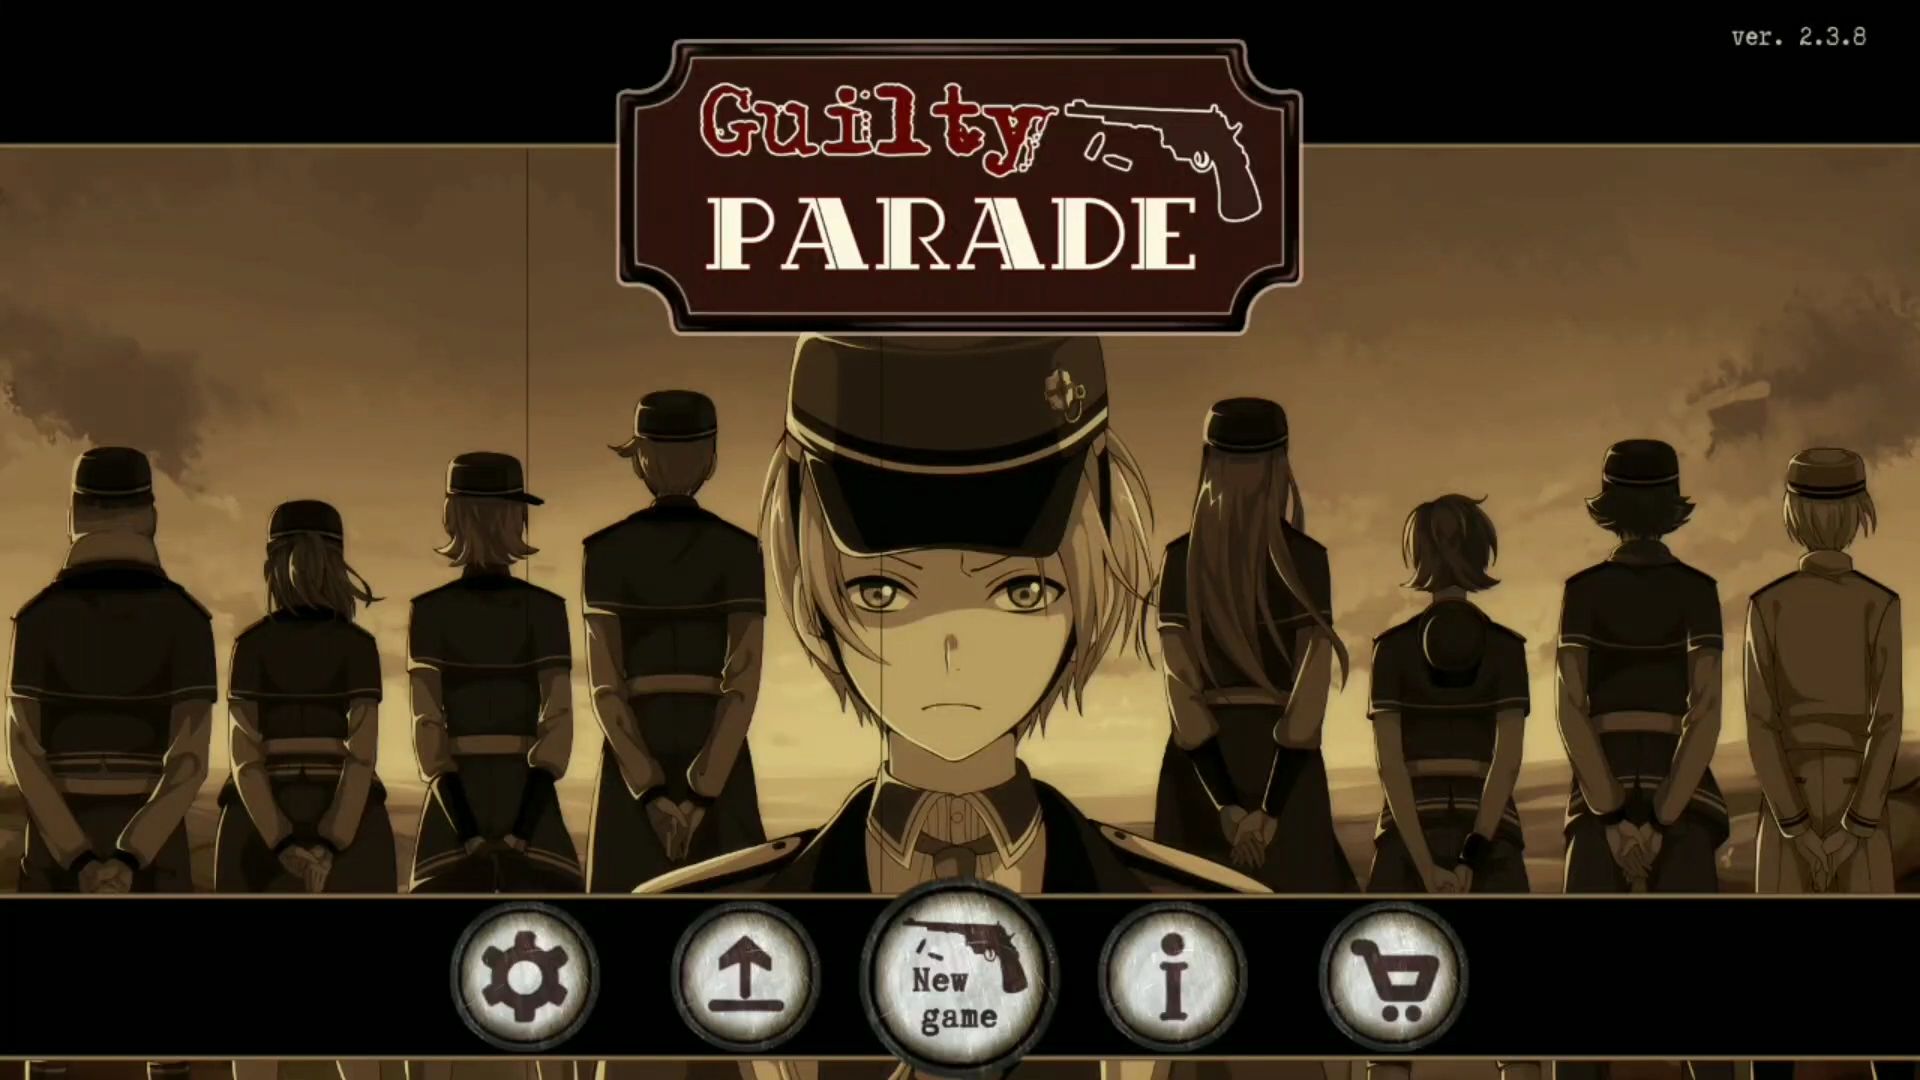 Full version of Android Gamebook game apk Guilty Parade for tablet and phone.